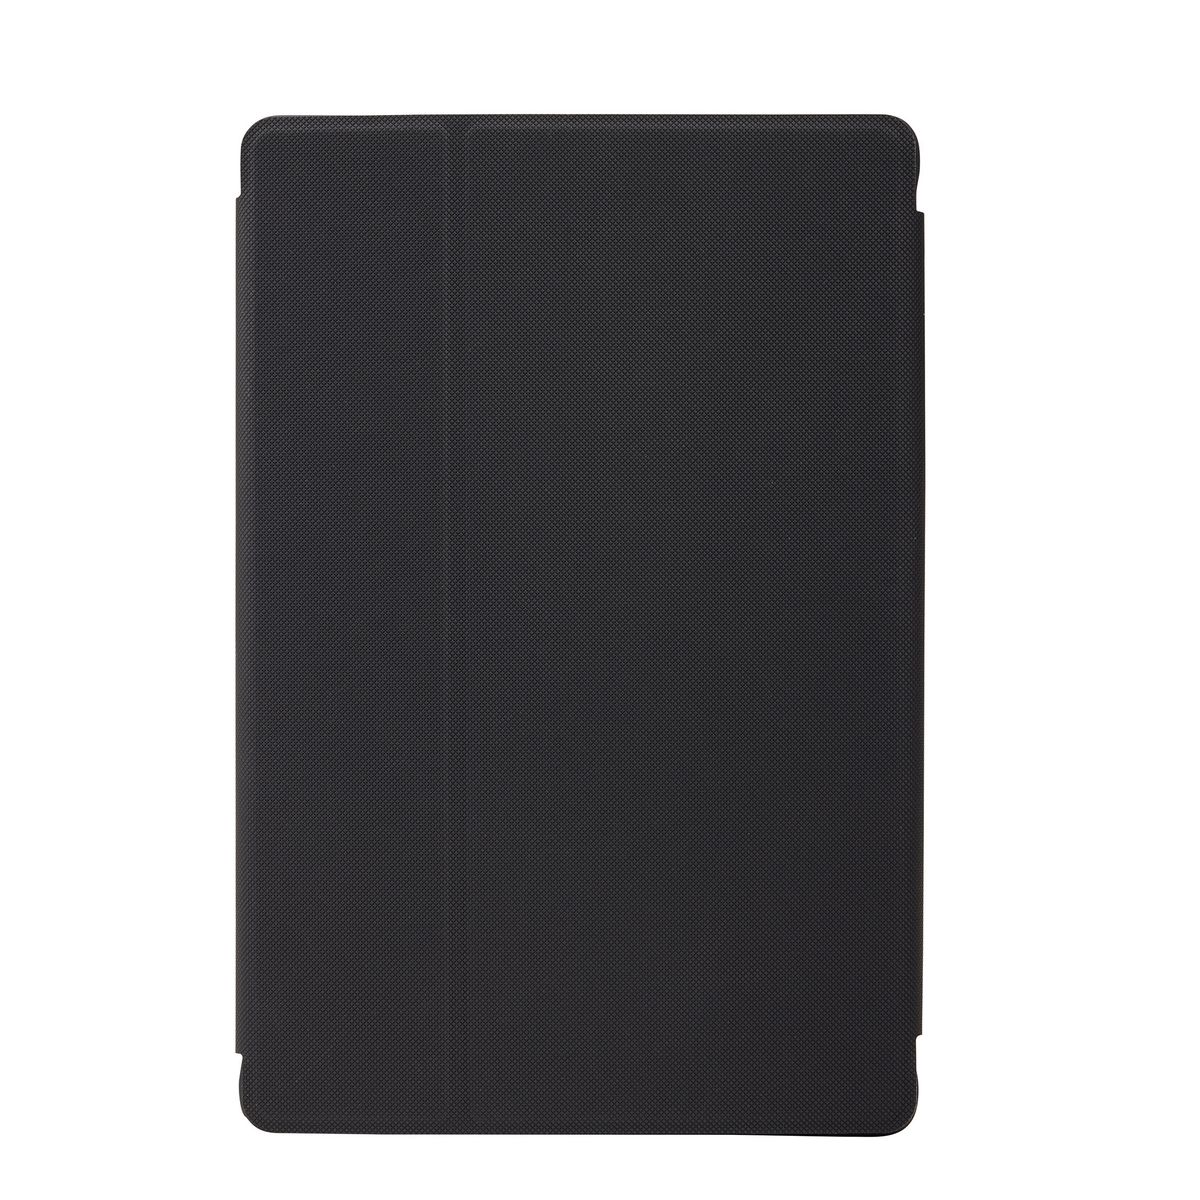 Case Logic SnapView Case for Samsung Galaxy Tab A8